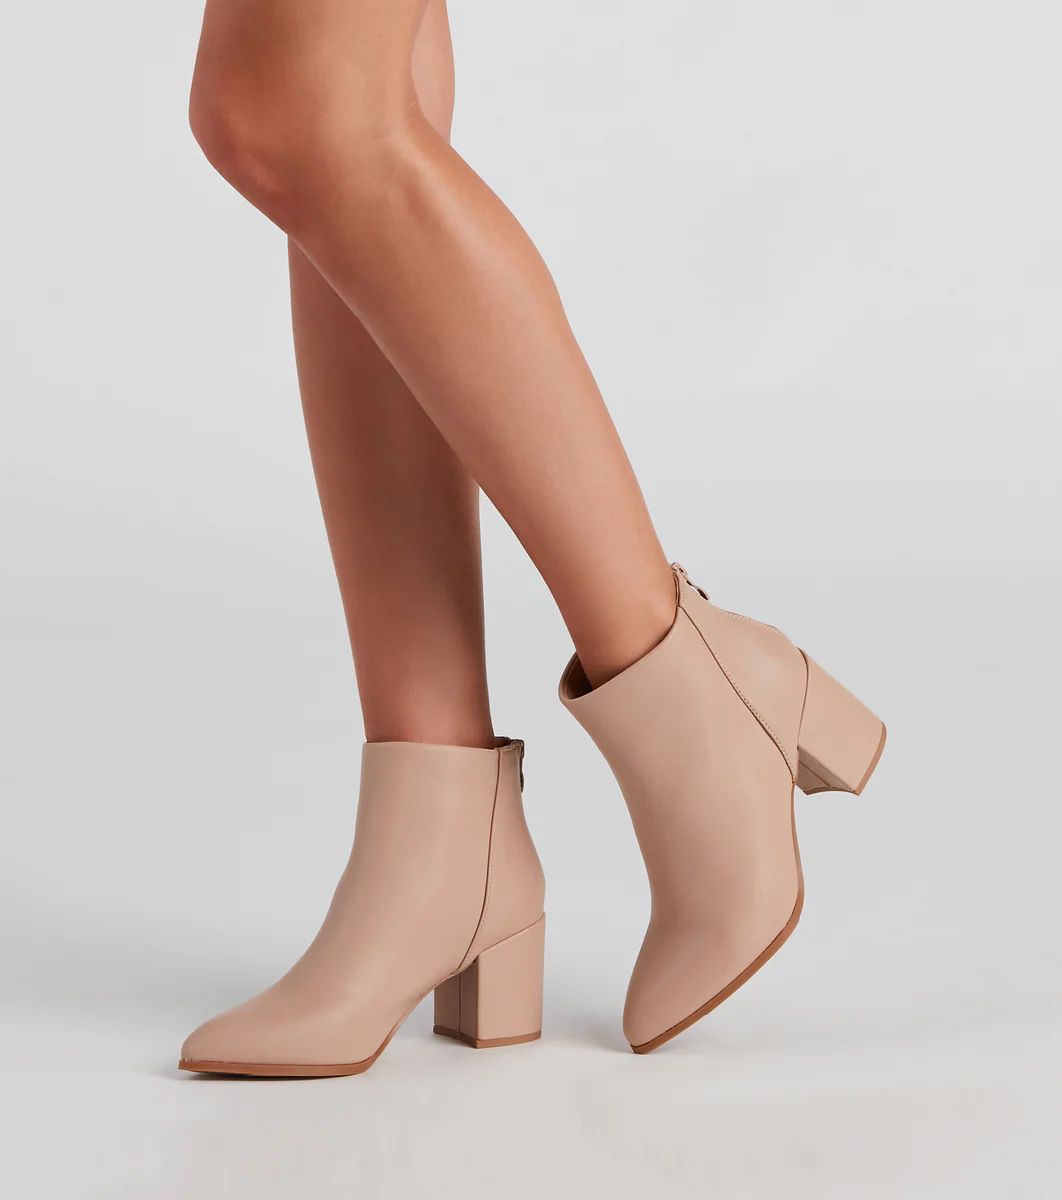 Basic Chic Faux Leather Booties | Windsor Stores